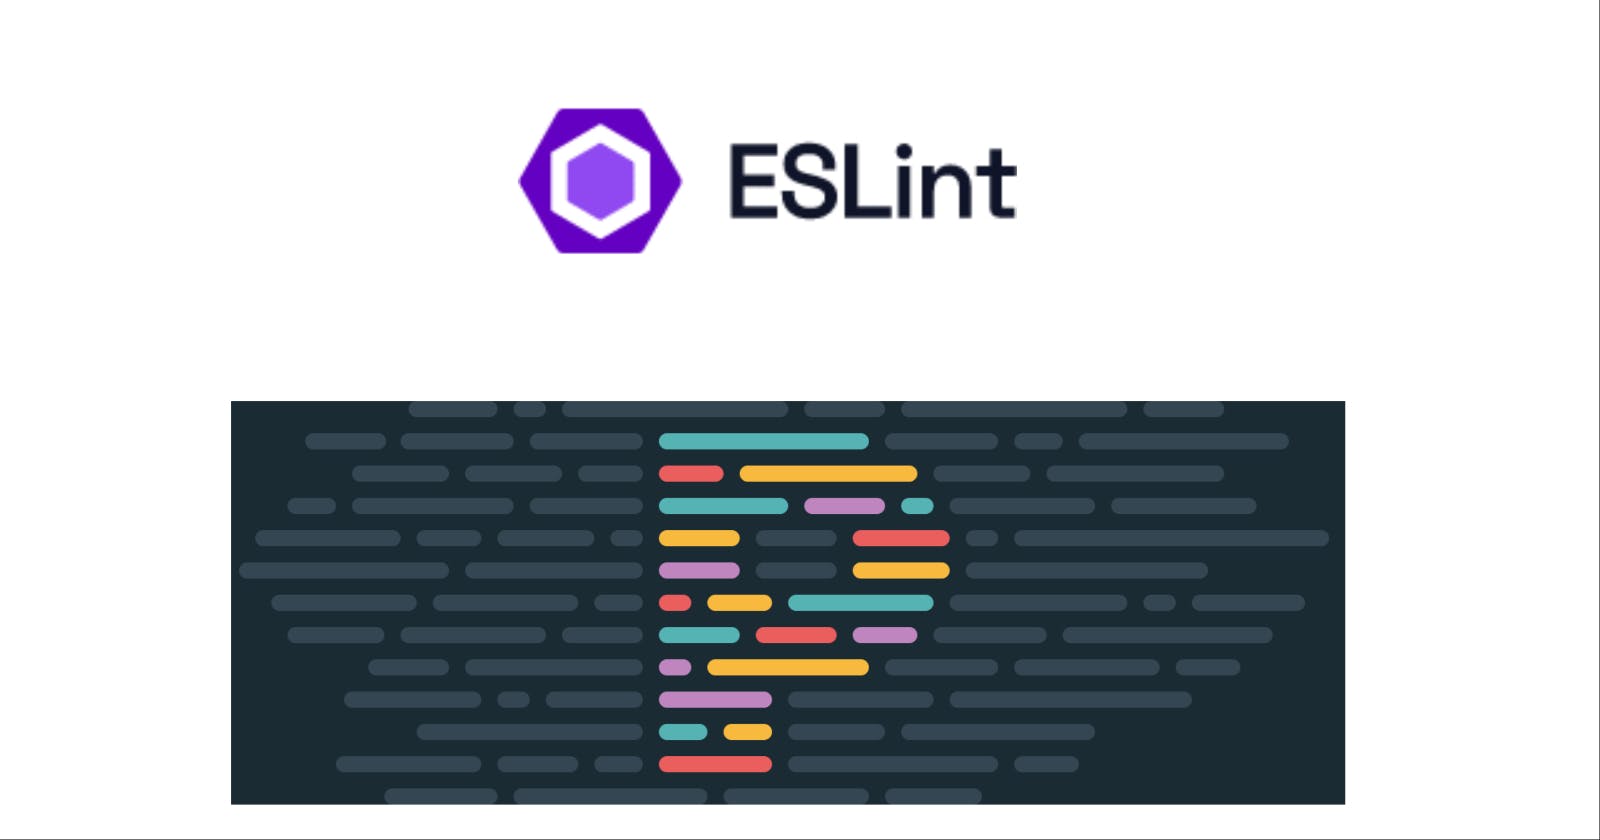 A Complete guide to setup ESLint and Prettier for a React project with Typescript.